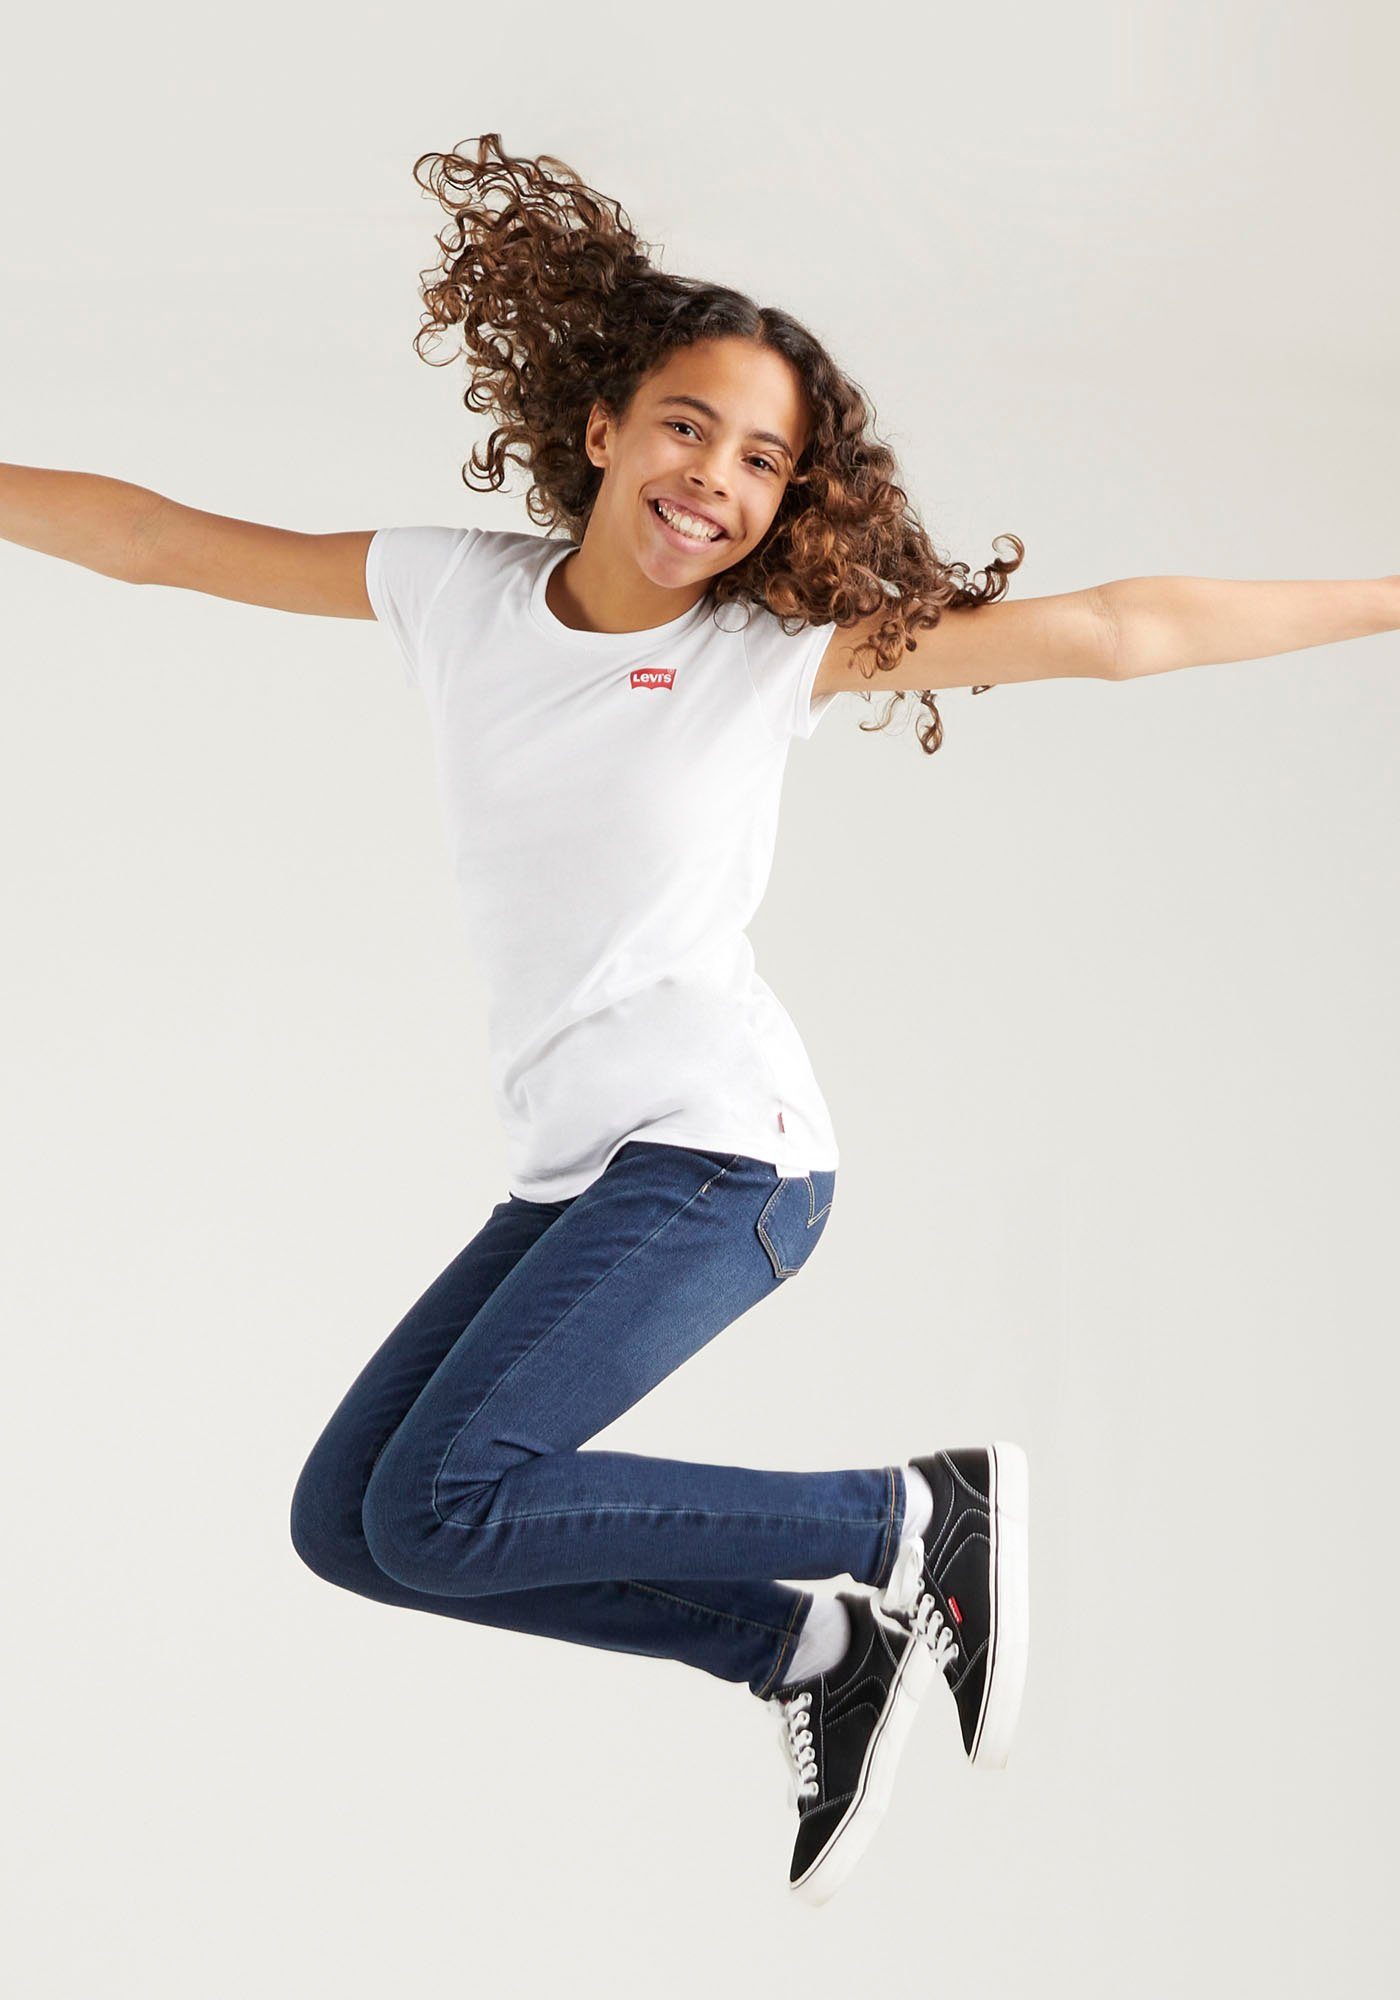 TEE for GIRLS weiß S/S T-Shirt BATWING Levi's® Kids